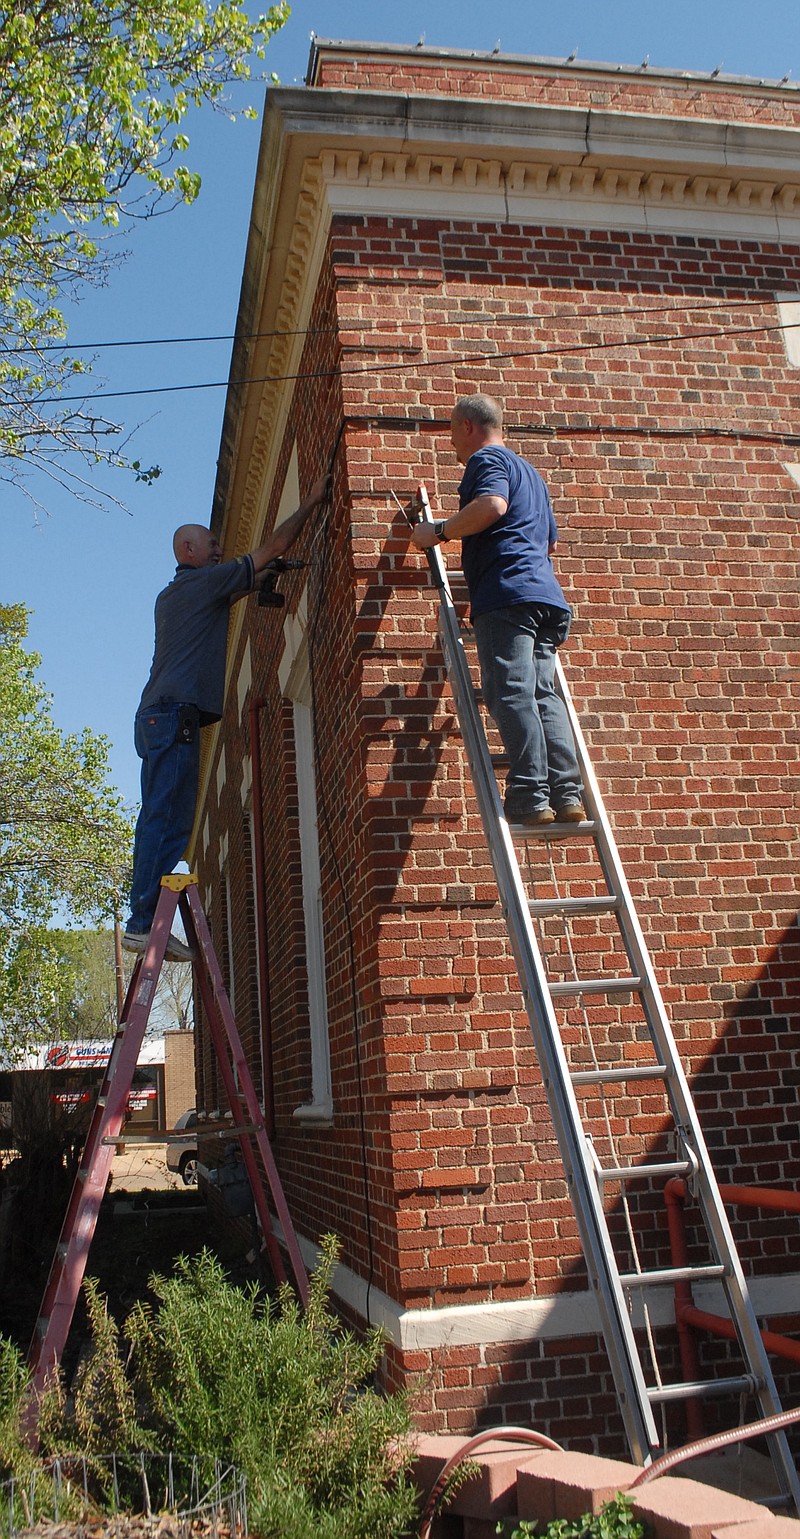 Workers of Steelcrest Security, in Texarkana, are drilling into the walls of the Atlanta Pubic Library to install outside security cameras. A total of 22 cameras now protect the inside and outside of the building for better management and safety of the public facility. The $4,500 expenditure was raised by Friends of the Library.